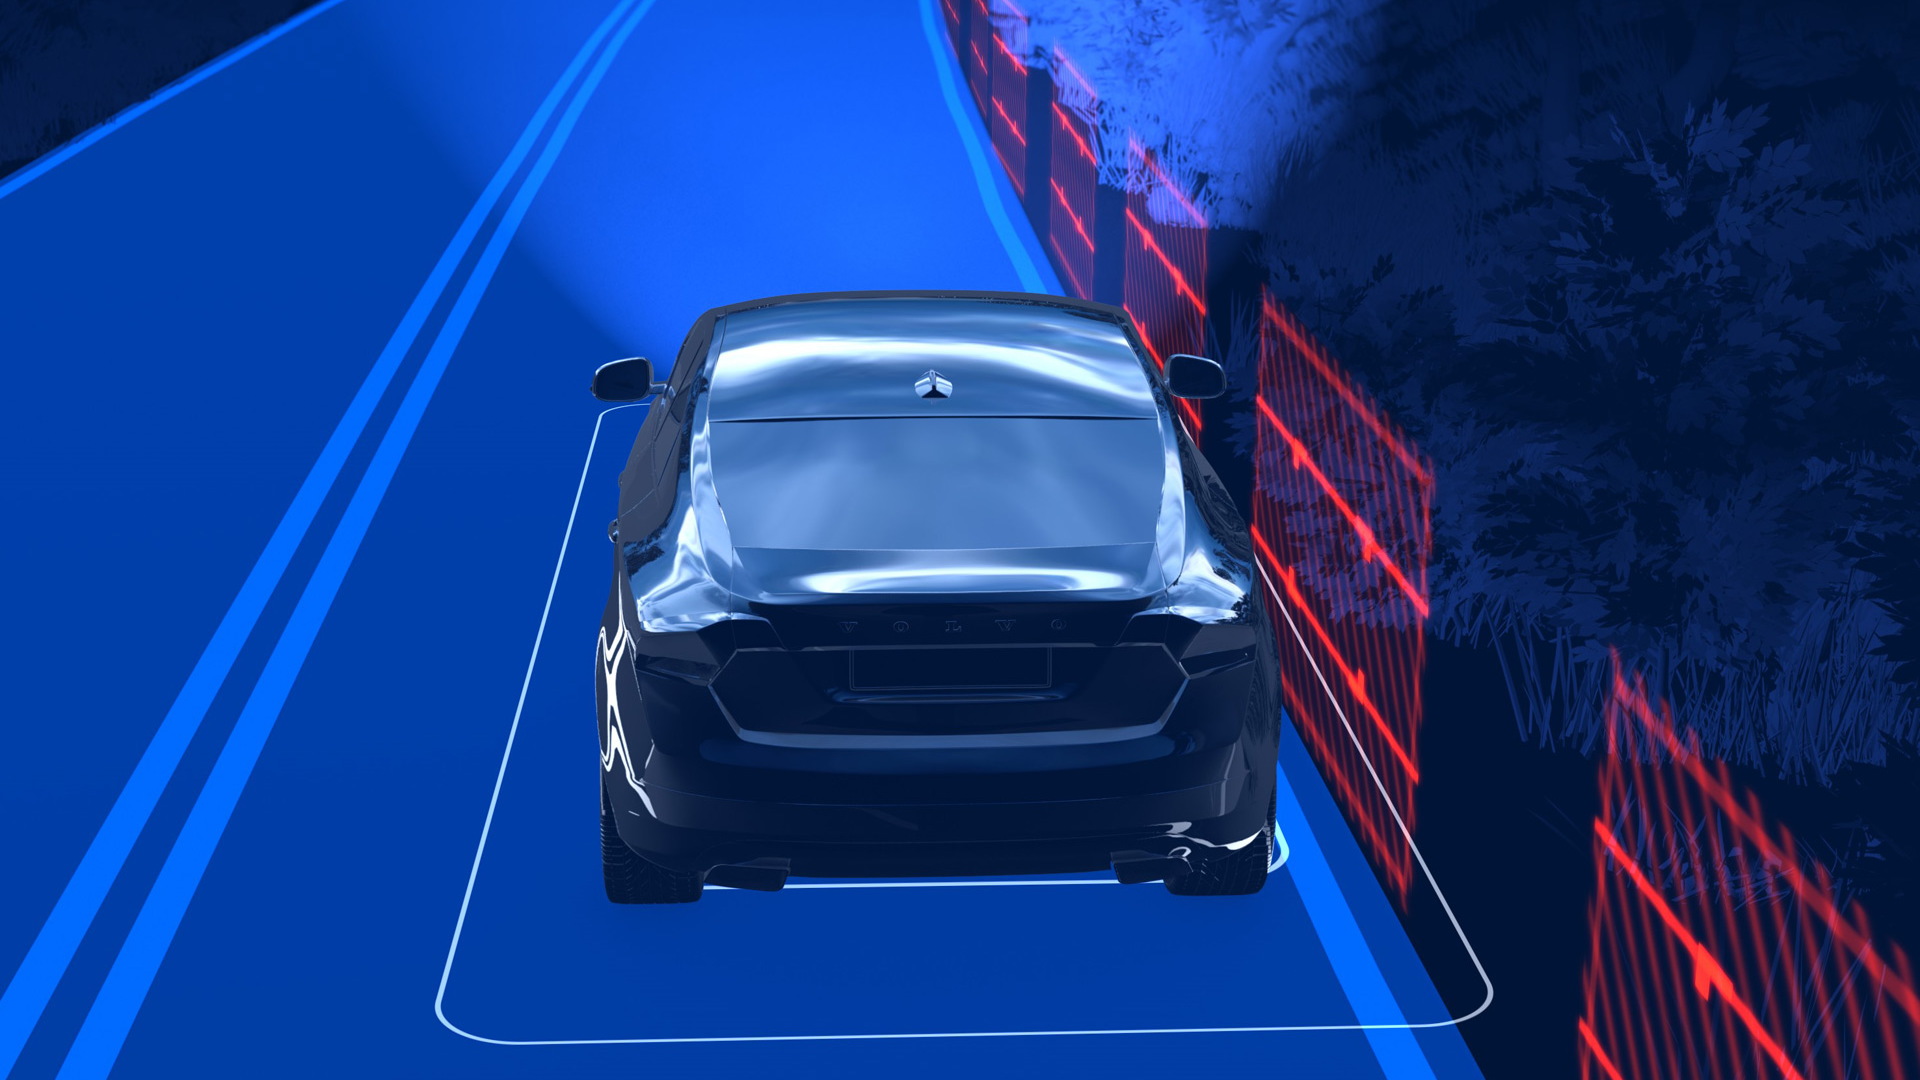 Volvo City Safety collision avoidance system now with automatic emergency steering